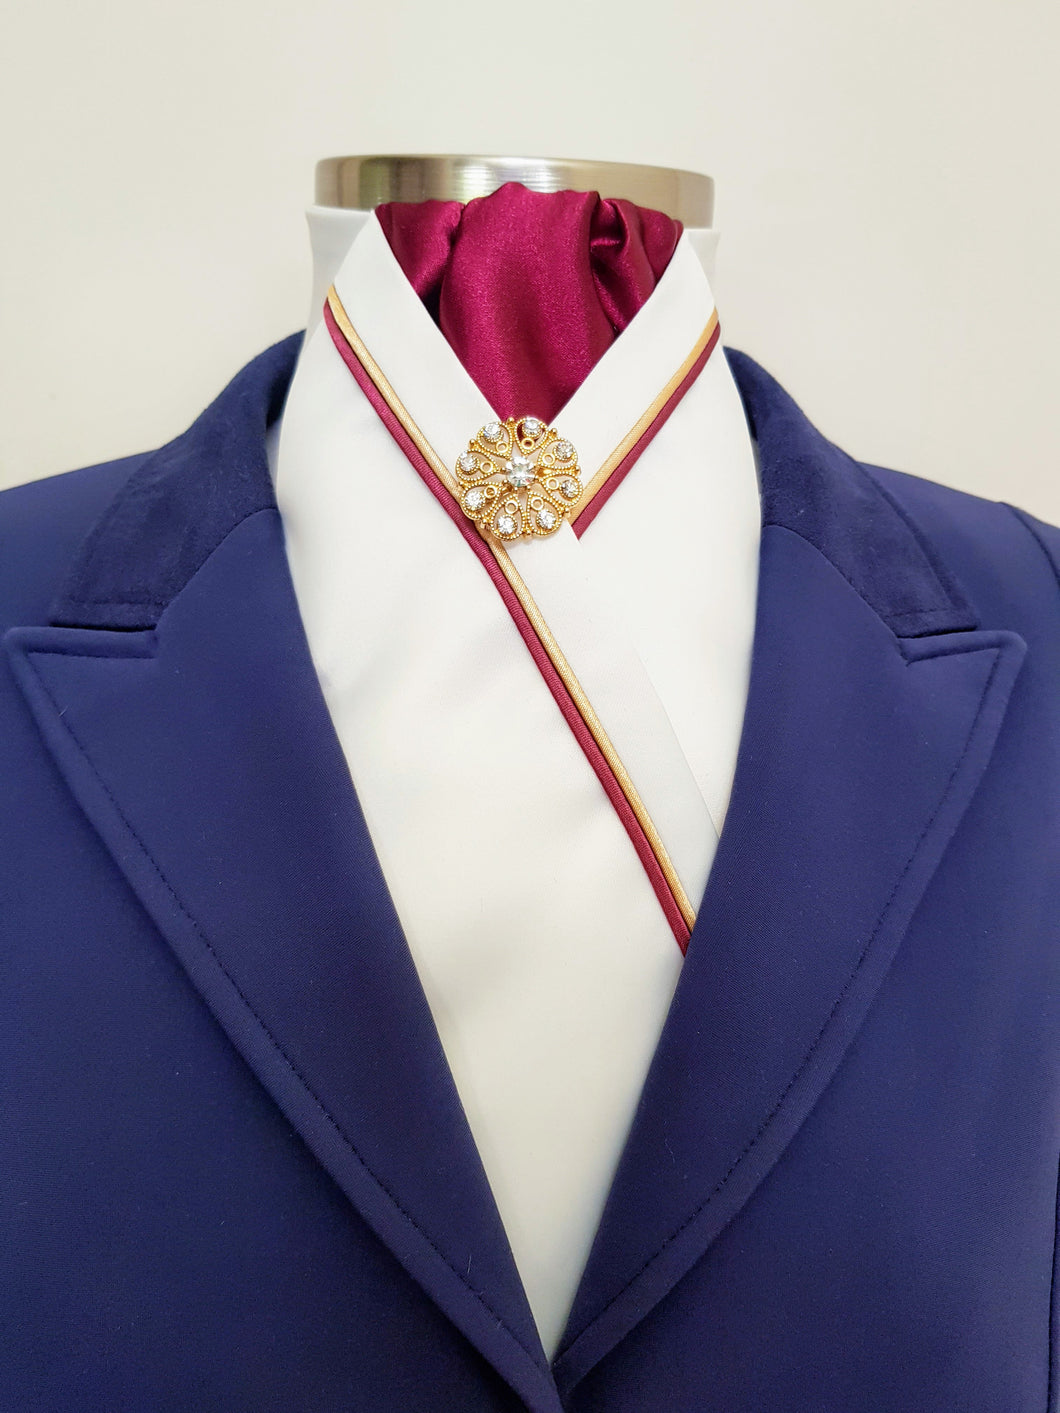 ERA RACHAEL STOCK TIE - Cream satin and burgundy, with gold & burgundy piping and gold brooch